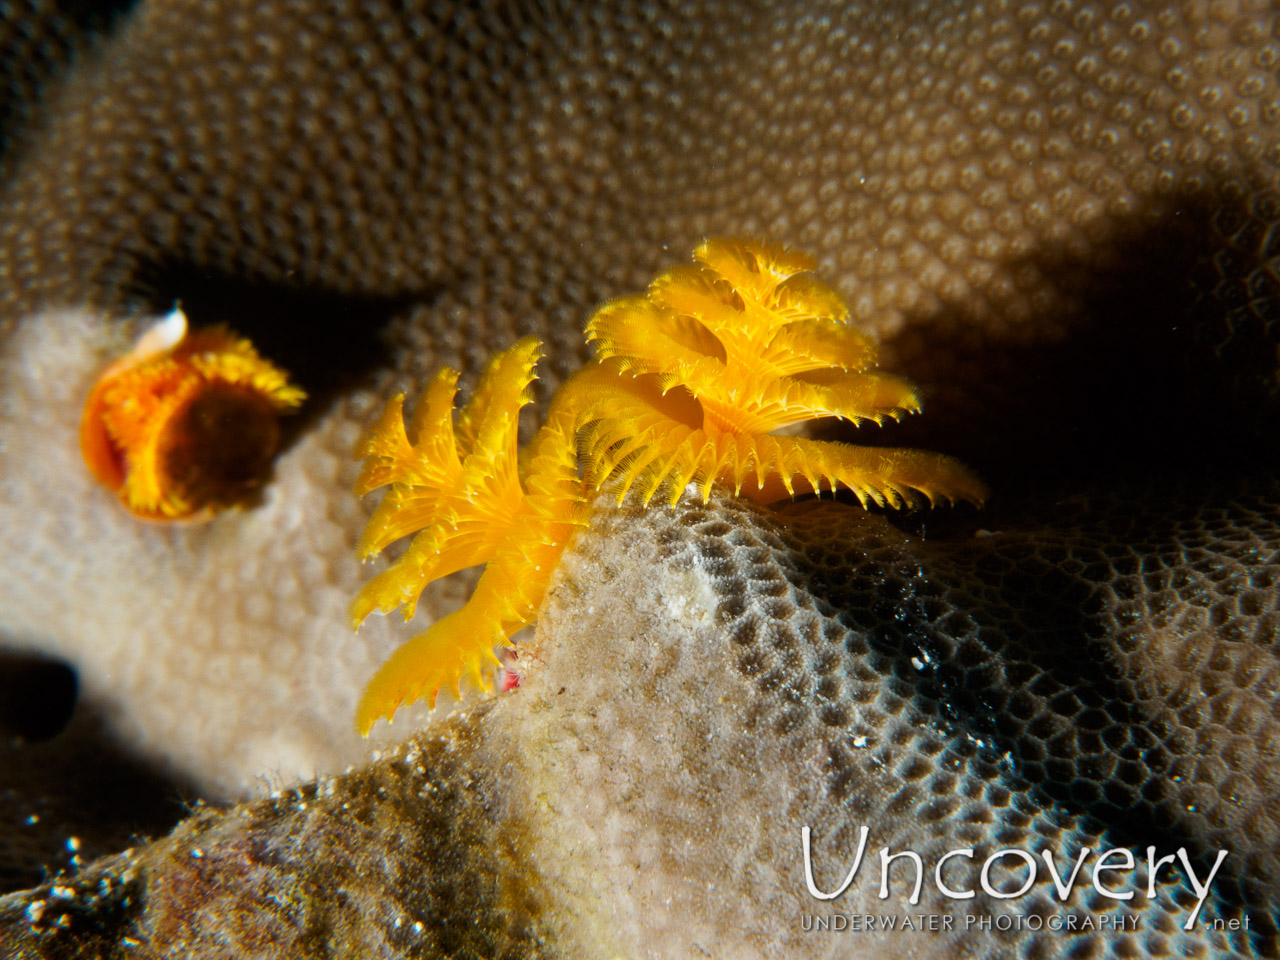 Christmas Tree Worm (spirobranchus Sp.), photo taken in Maldives, Male Atoll, South Male Atoll, Laguna Reef